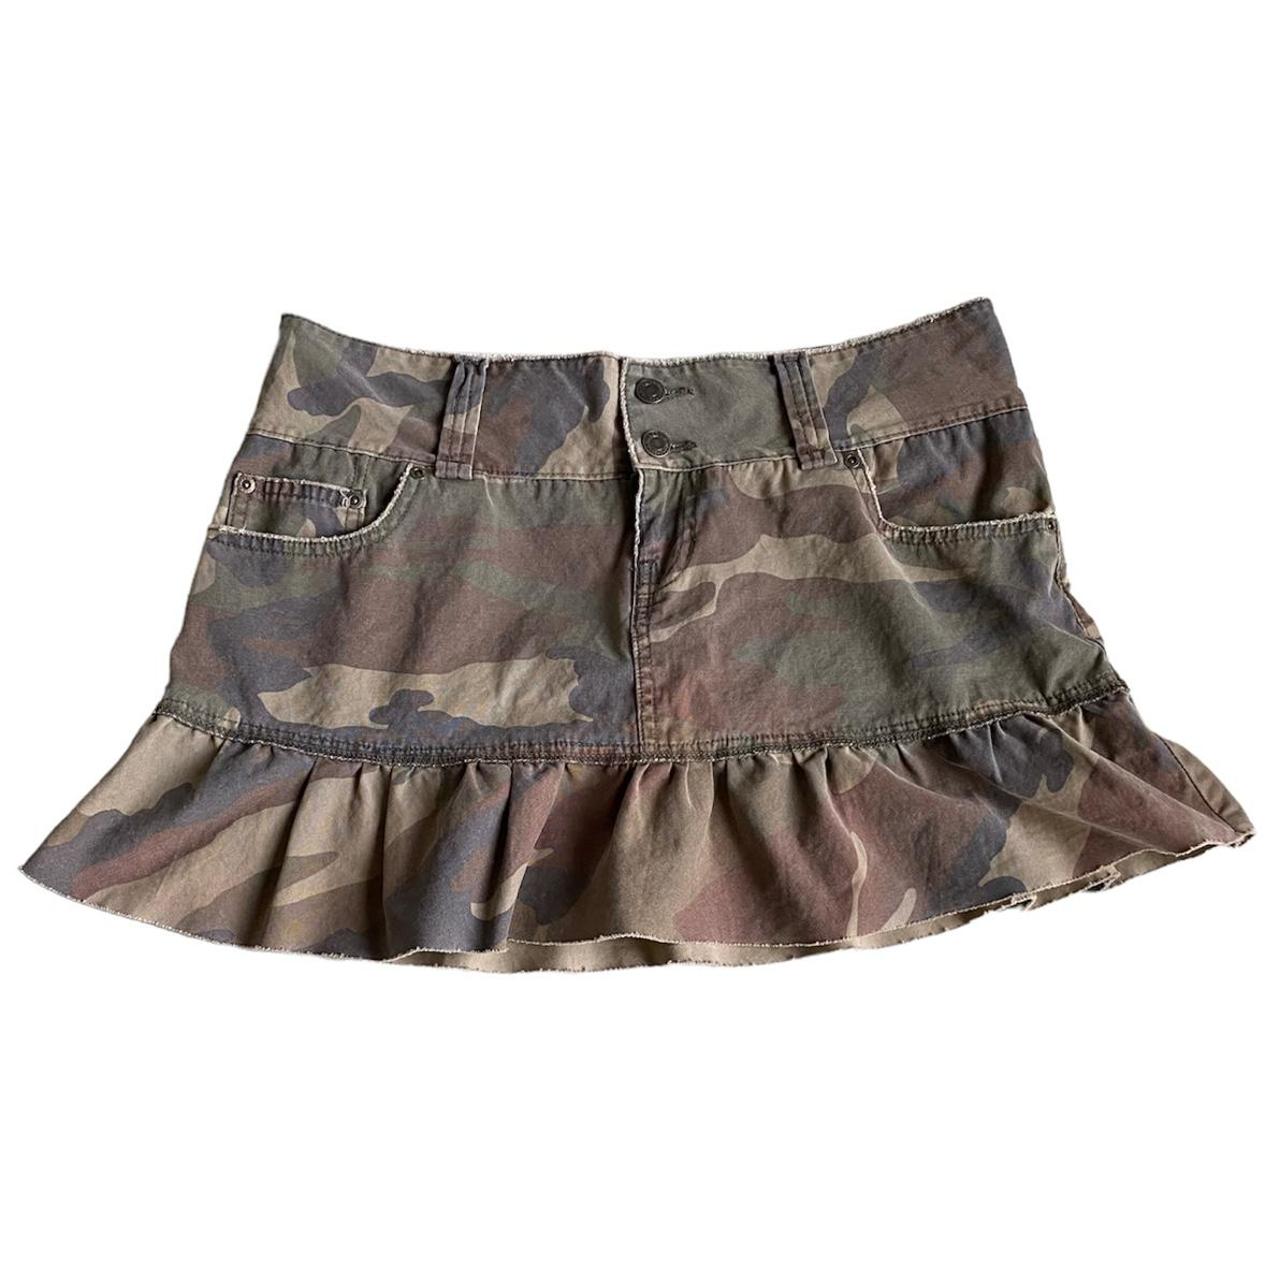 Abercrombie & Fitch Women's Green and Khaki Skirt